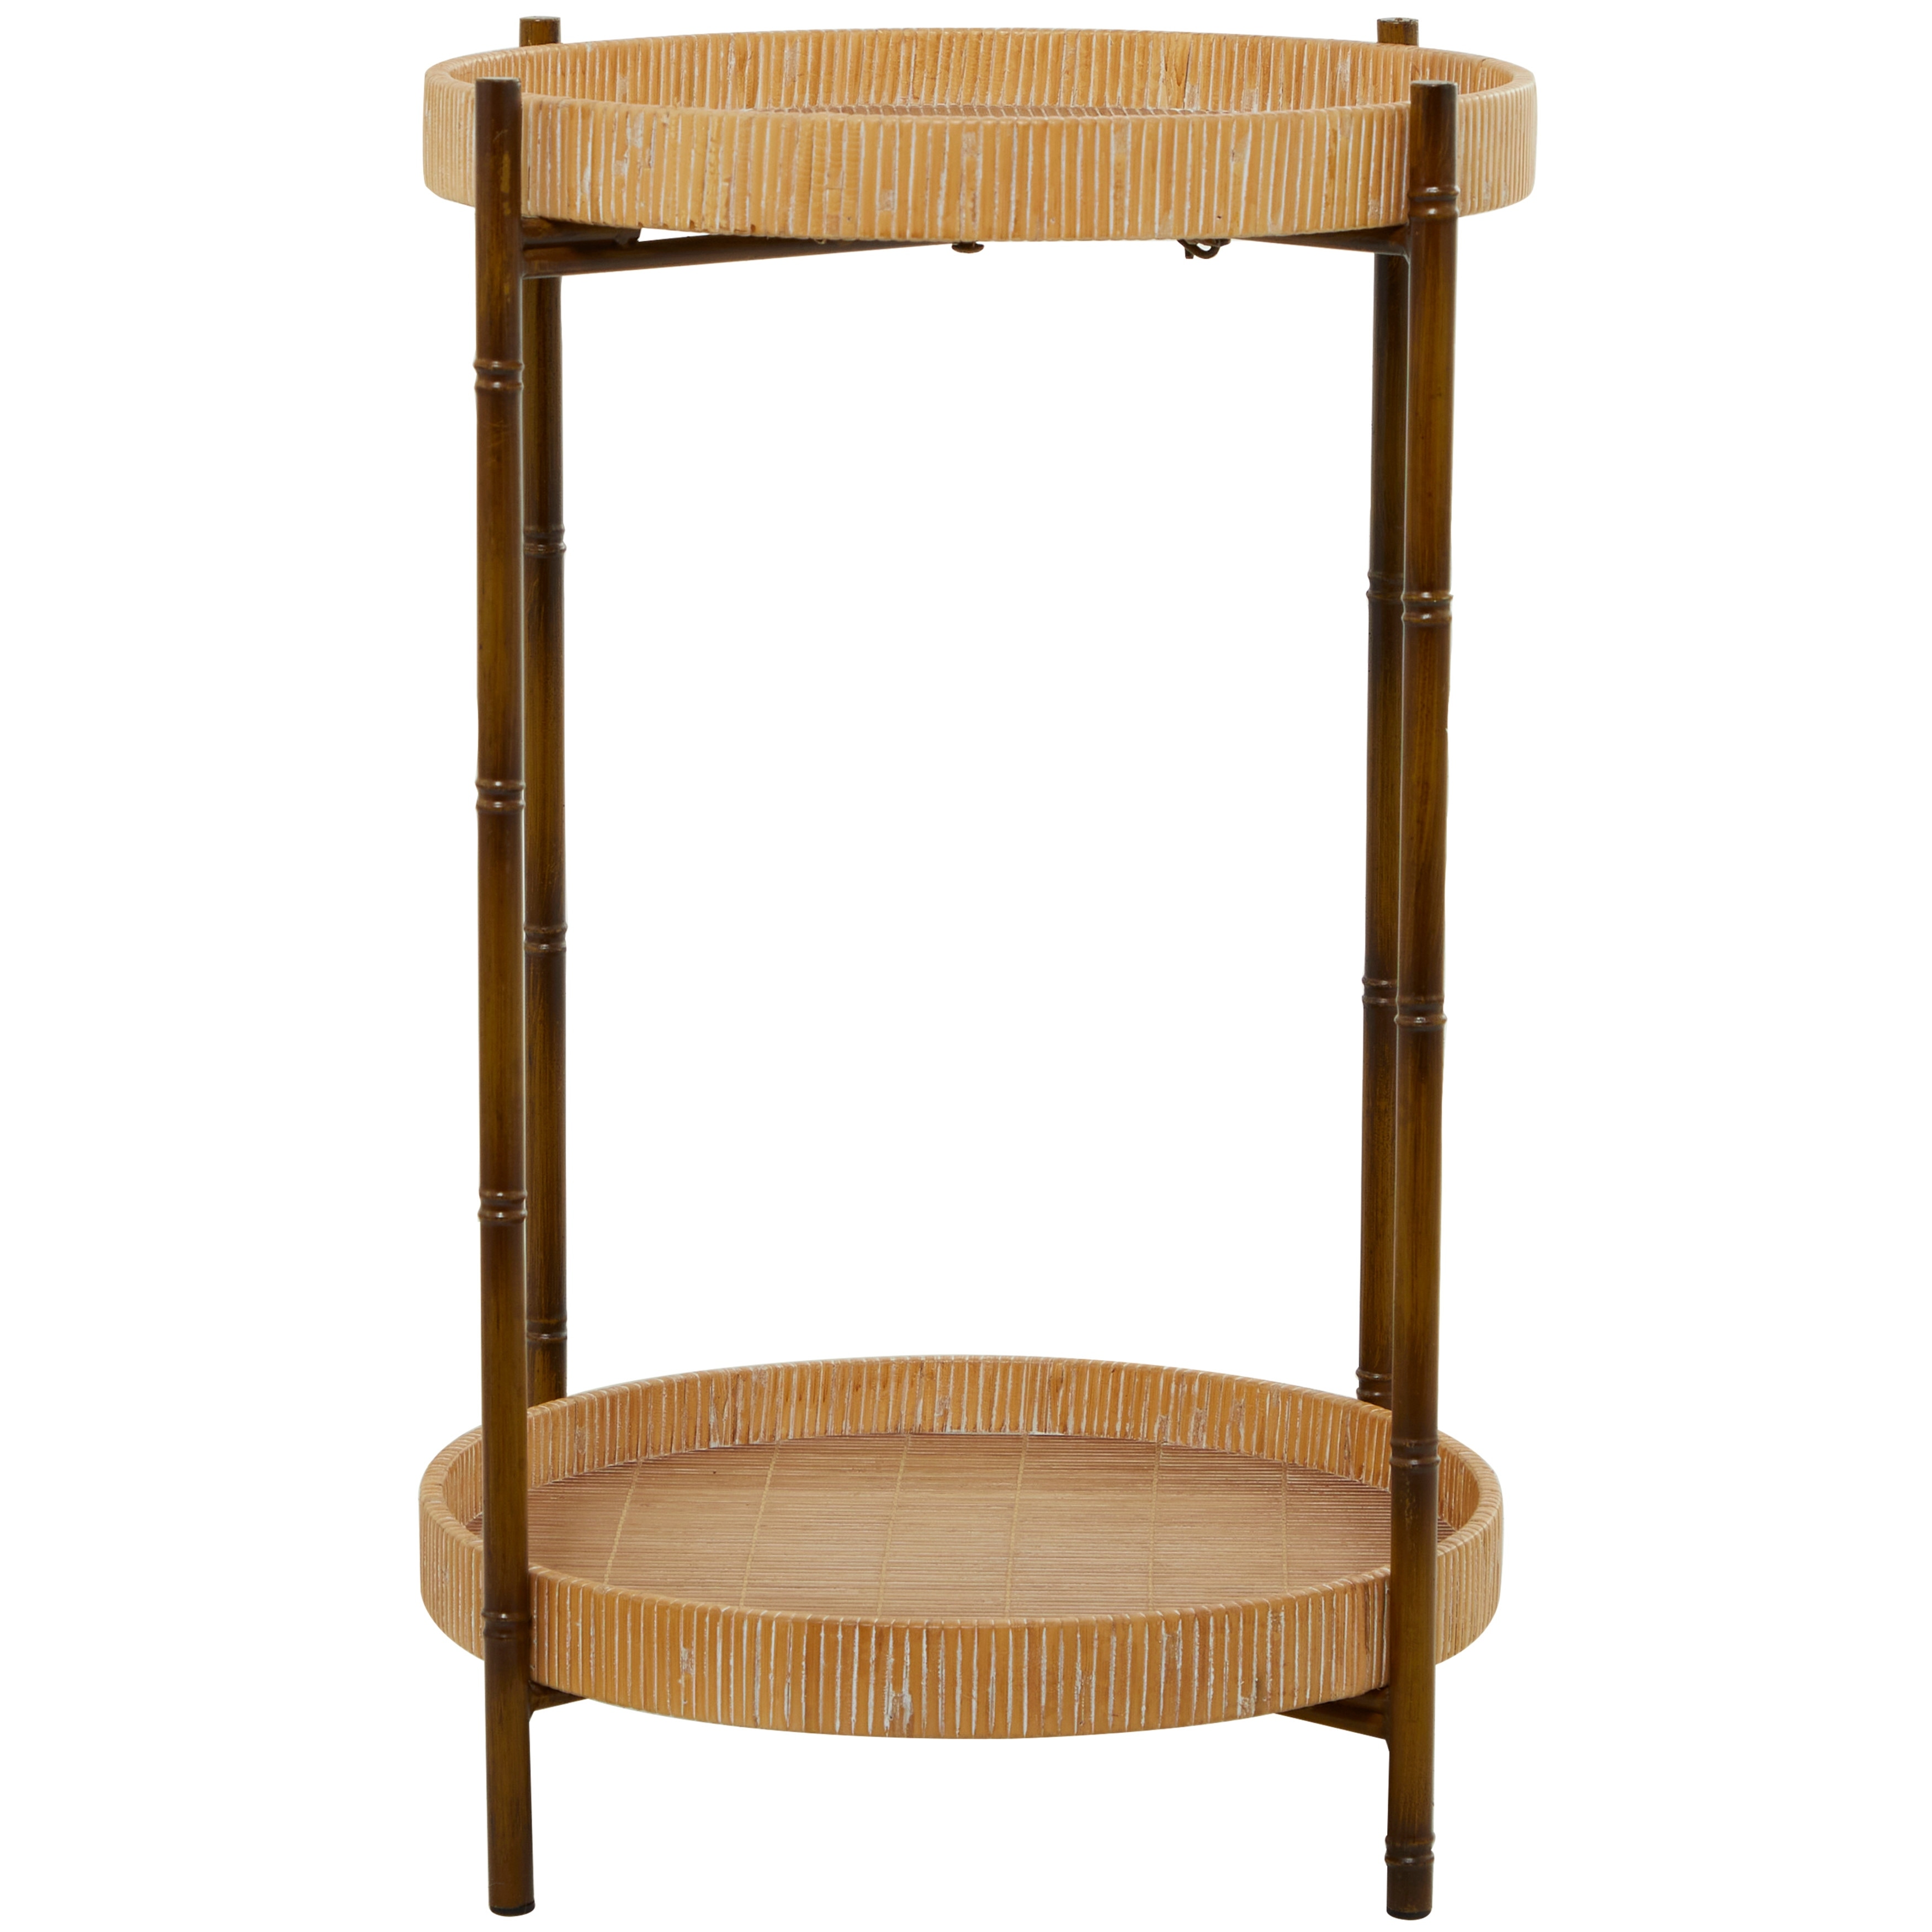 Brown Rattan 2 Tray Shelves Accent Table with Metal Bamboo Inspired Legs - 18 x 18 x 26